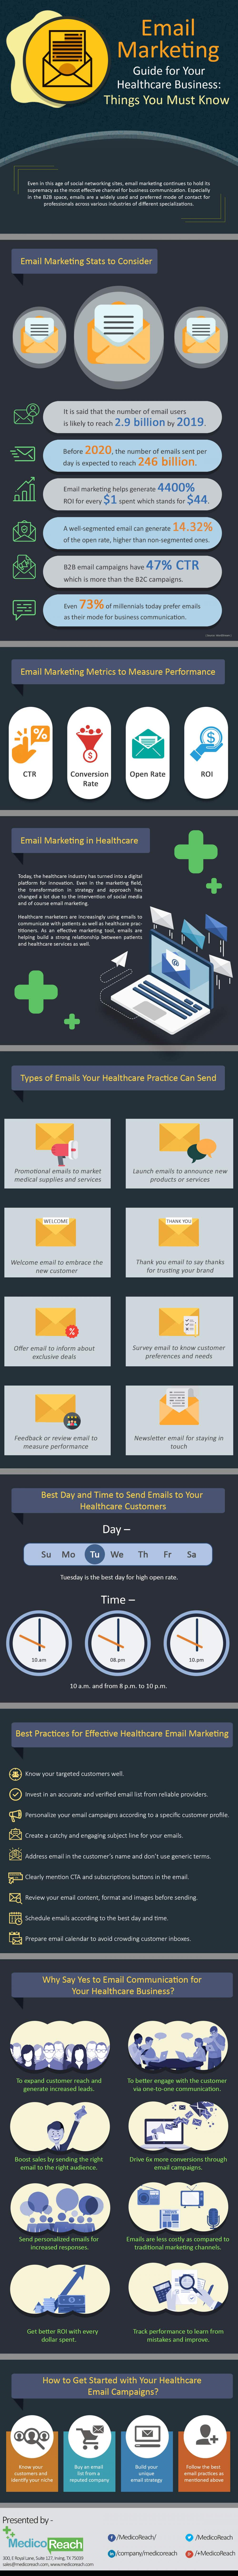 Email Marketing Guide for Healthcare Business